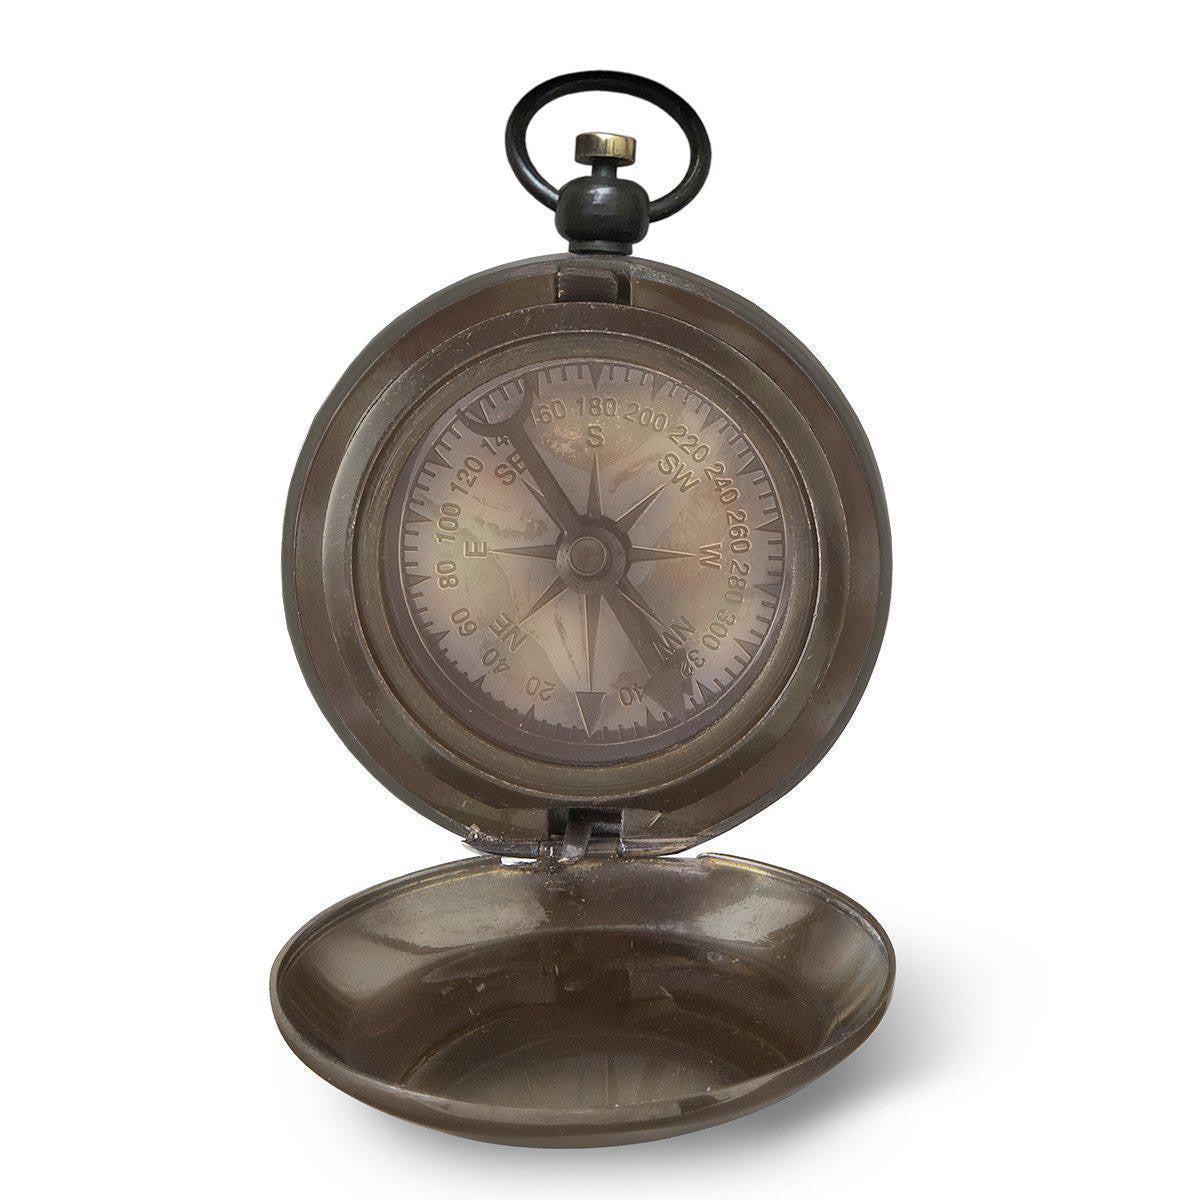 Faith Quote Engraved Compass With Wooden Box